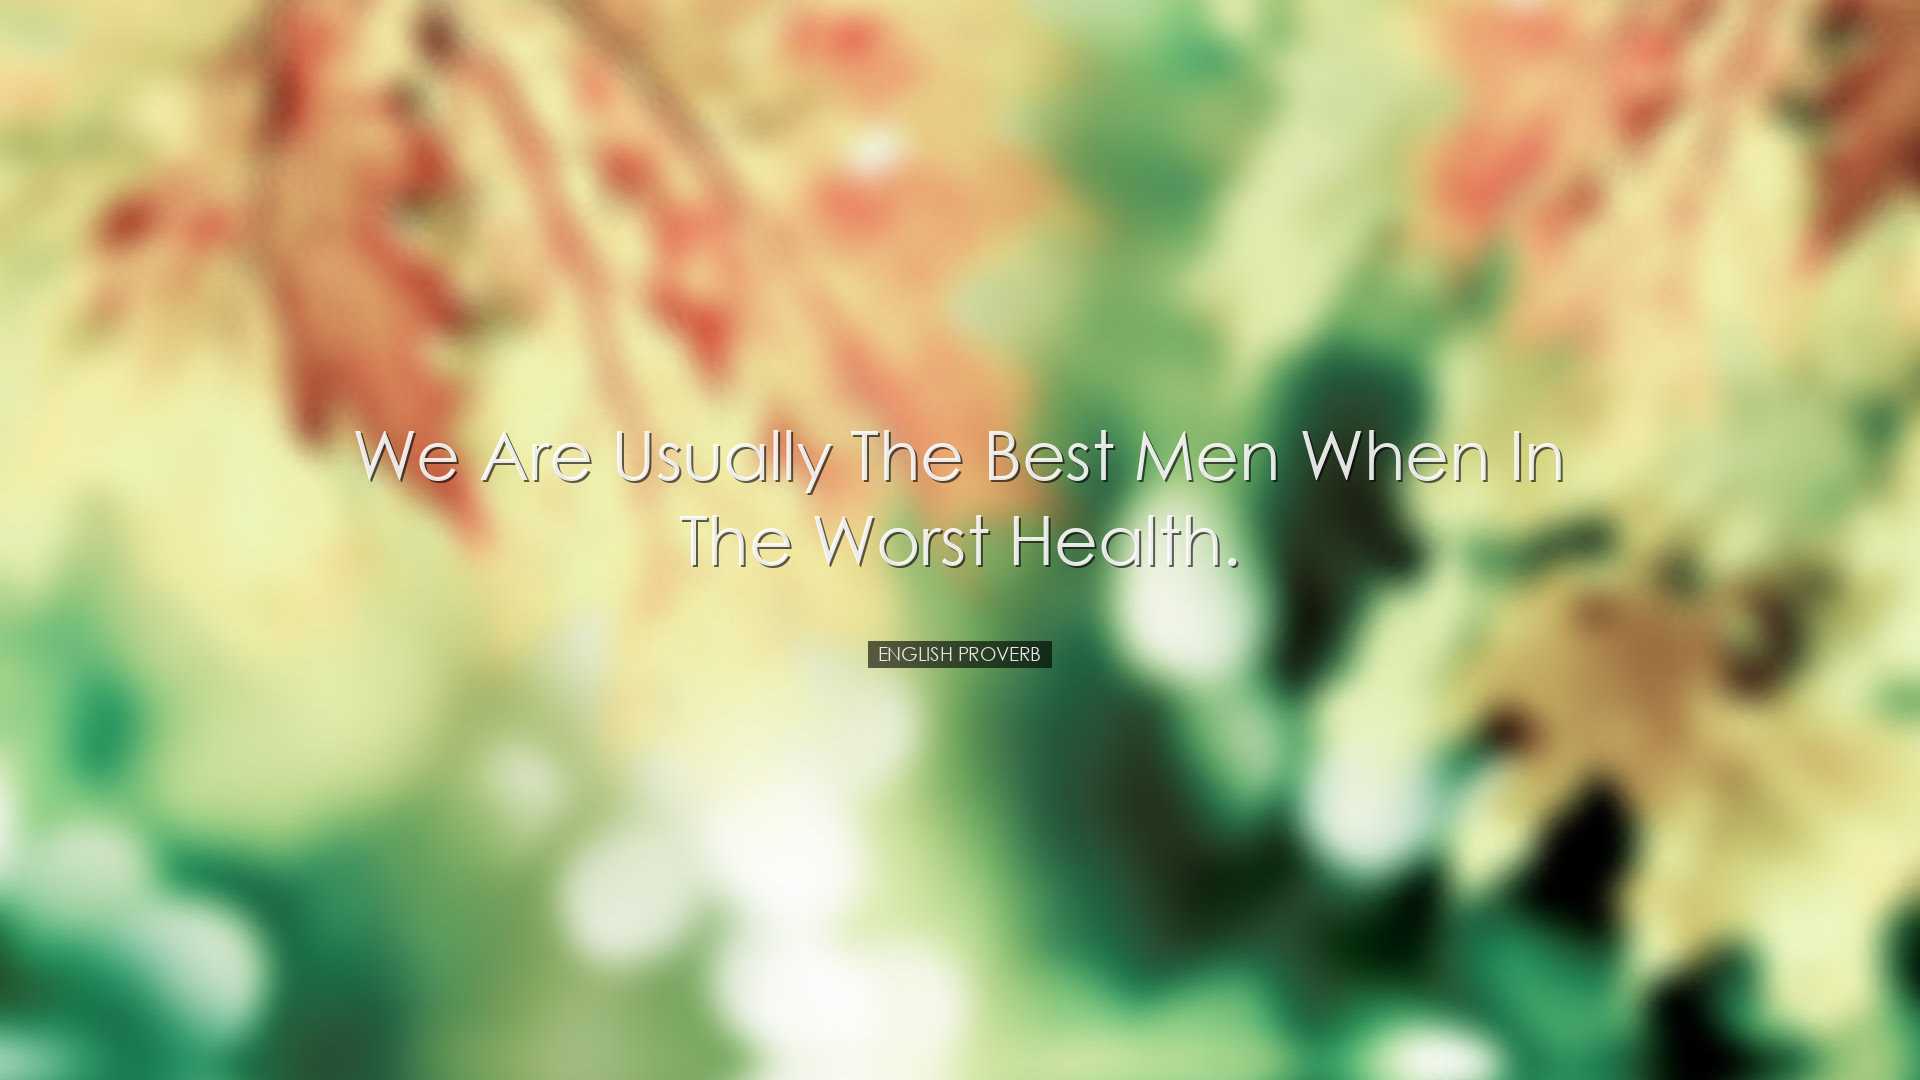 We are usually the best men when in the worst health. - English Pr